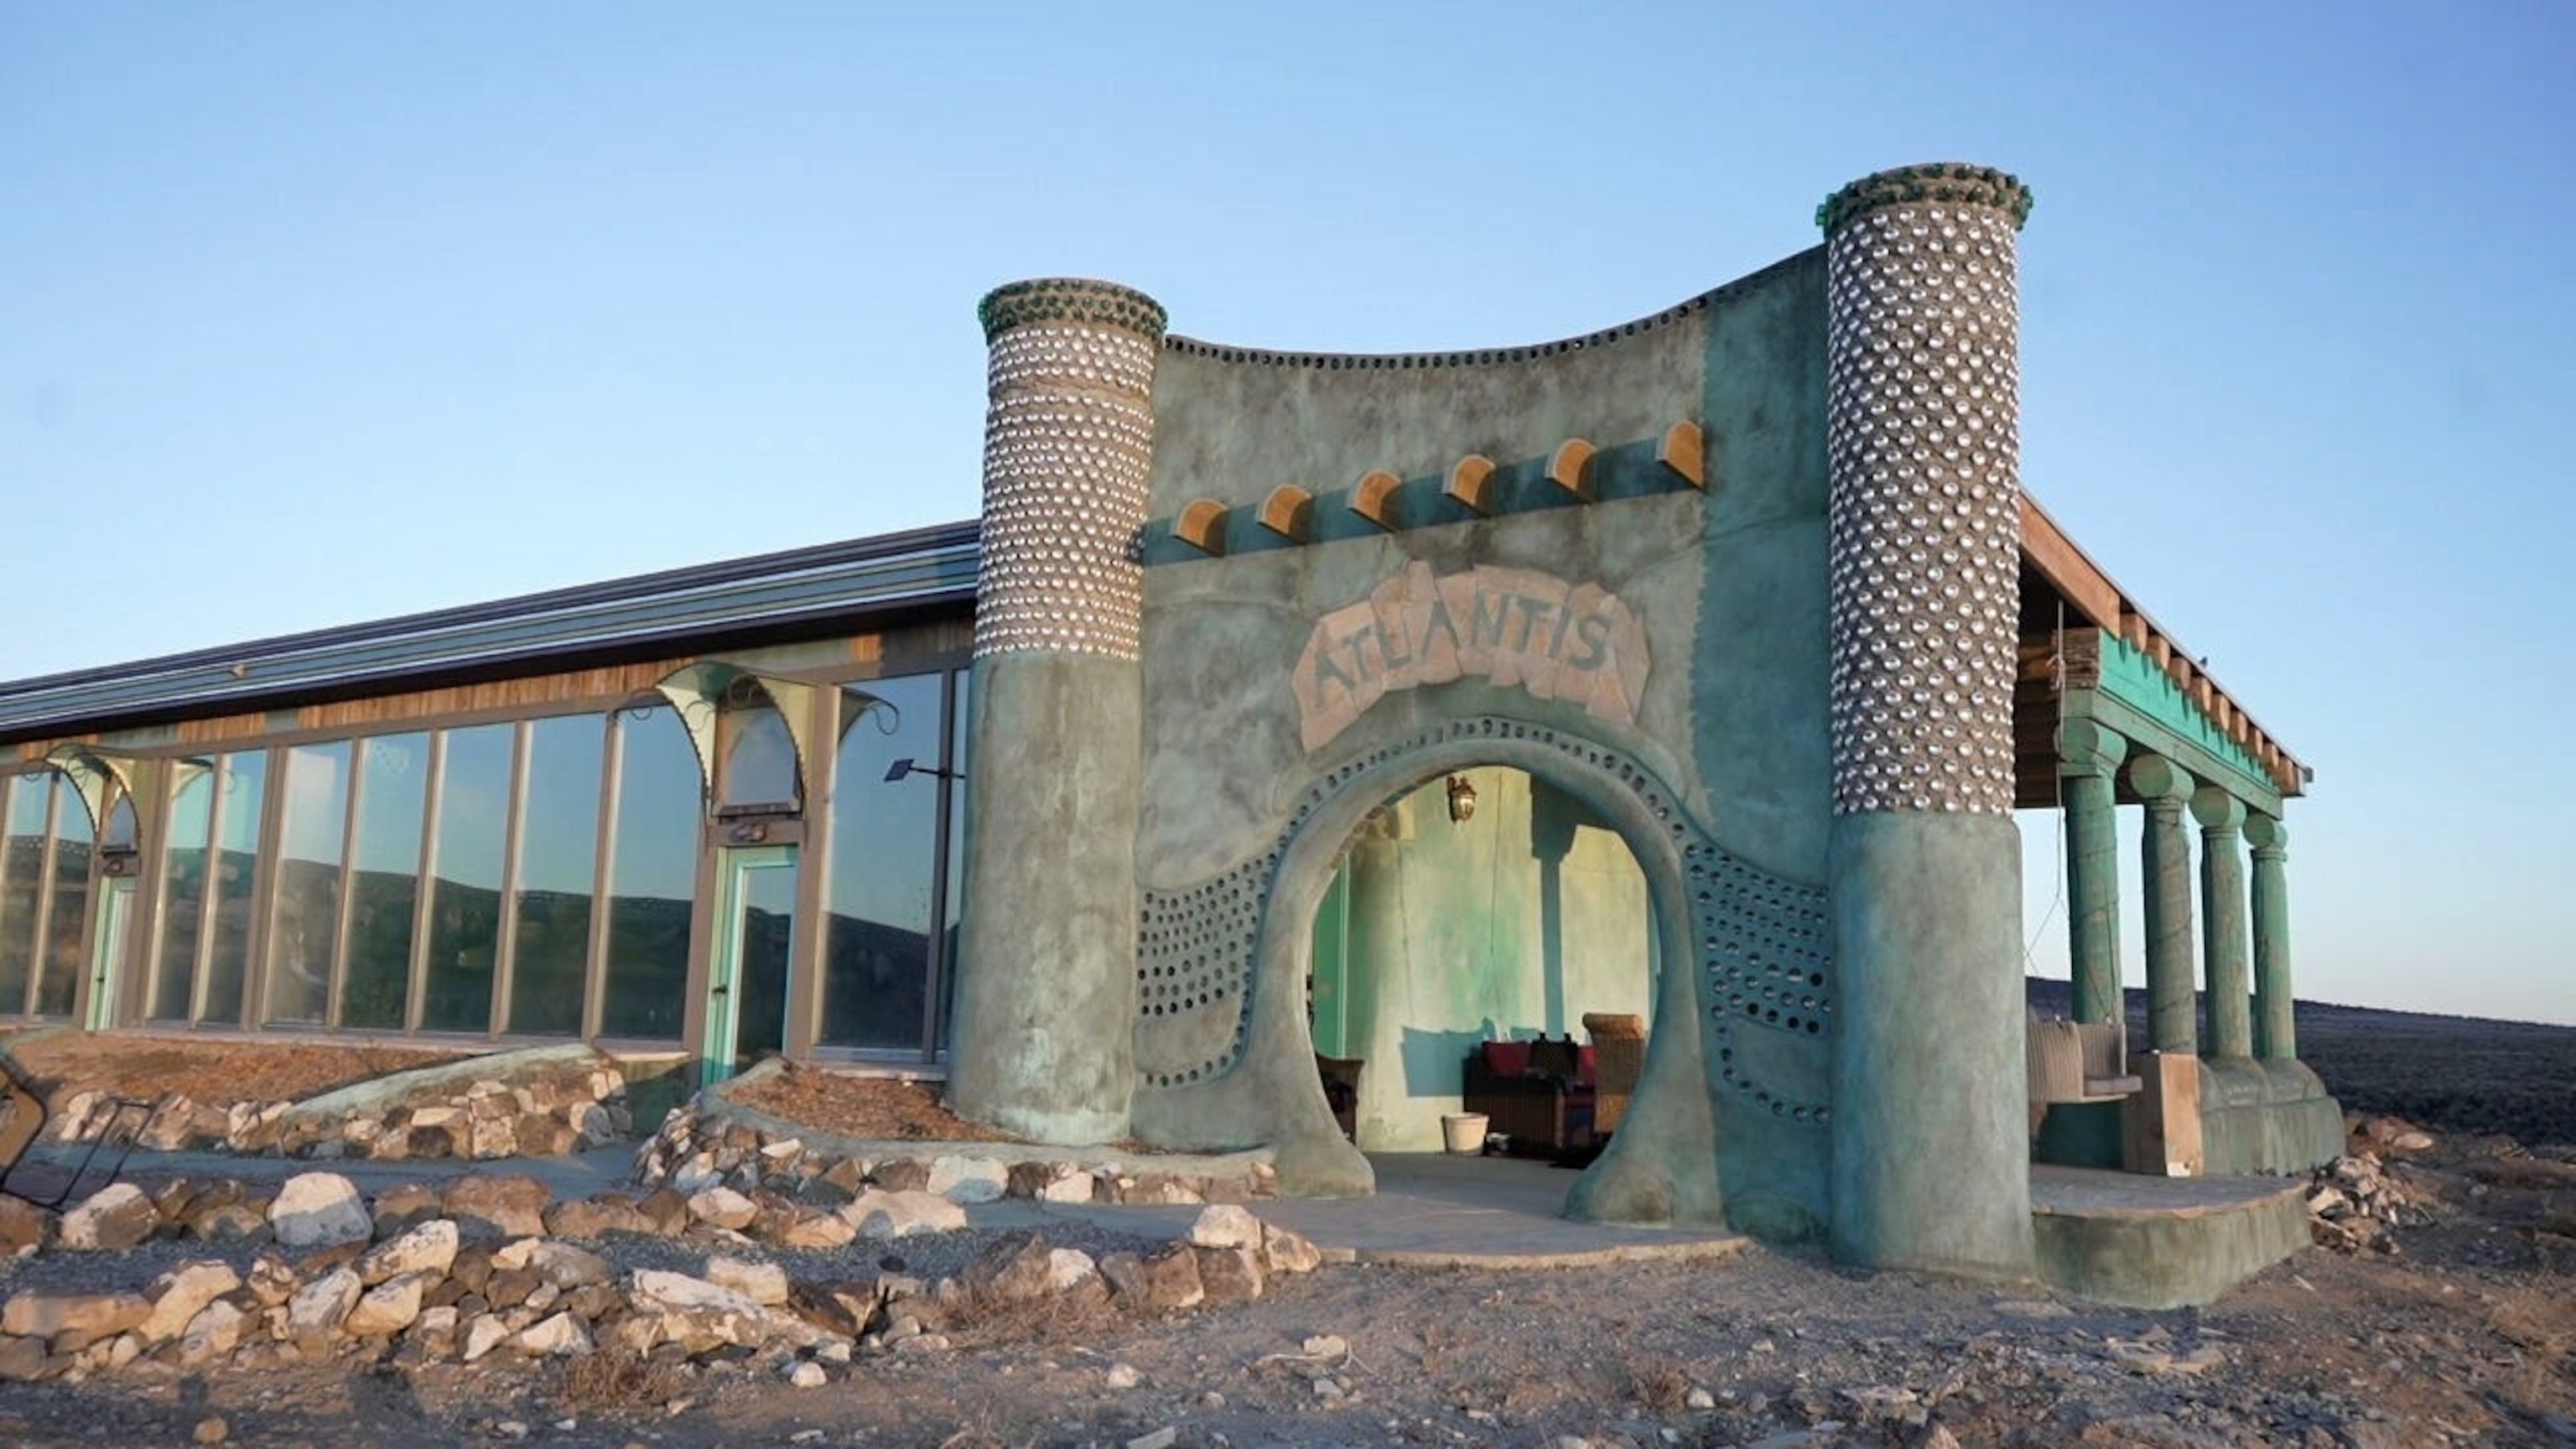 Photo: Outside Taos, New Mexico, a community of Earthships offers off-grid living, claiming it is the answer to building sustainable development.